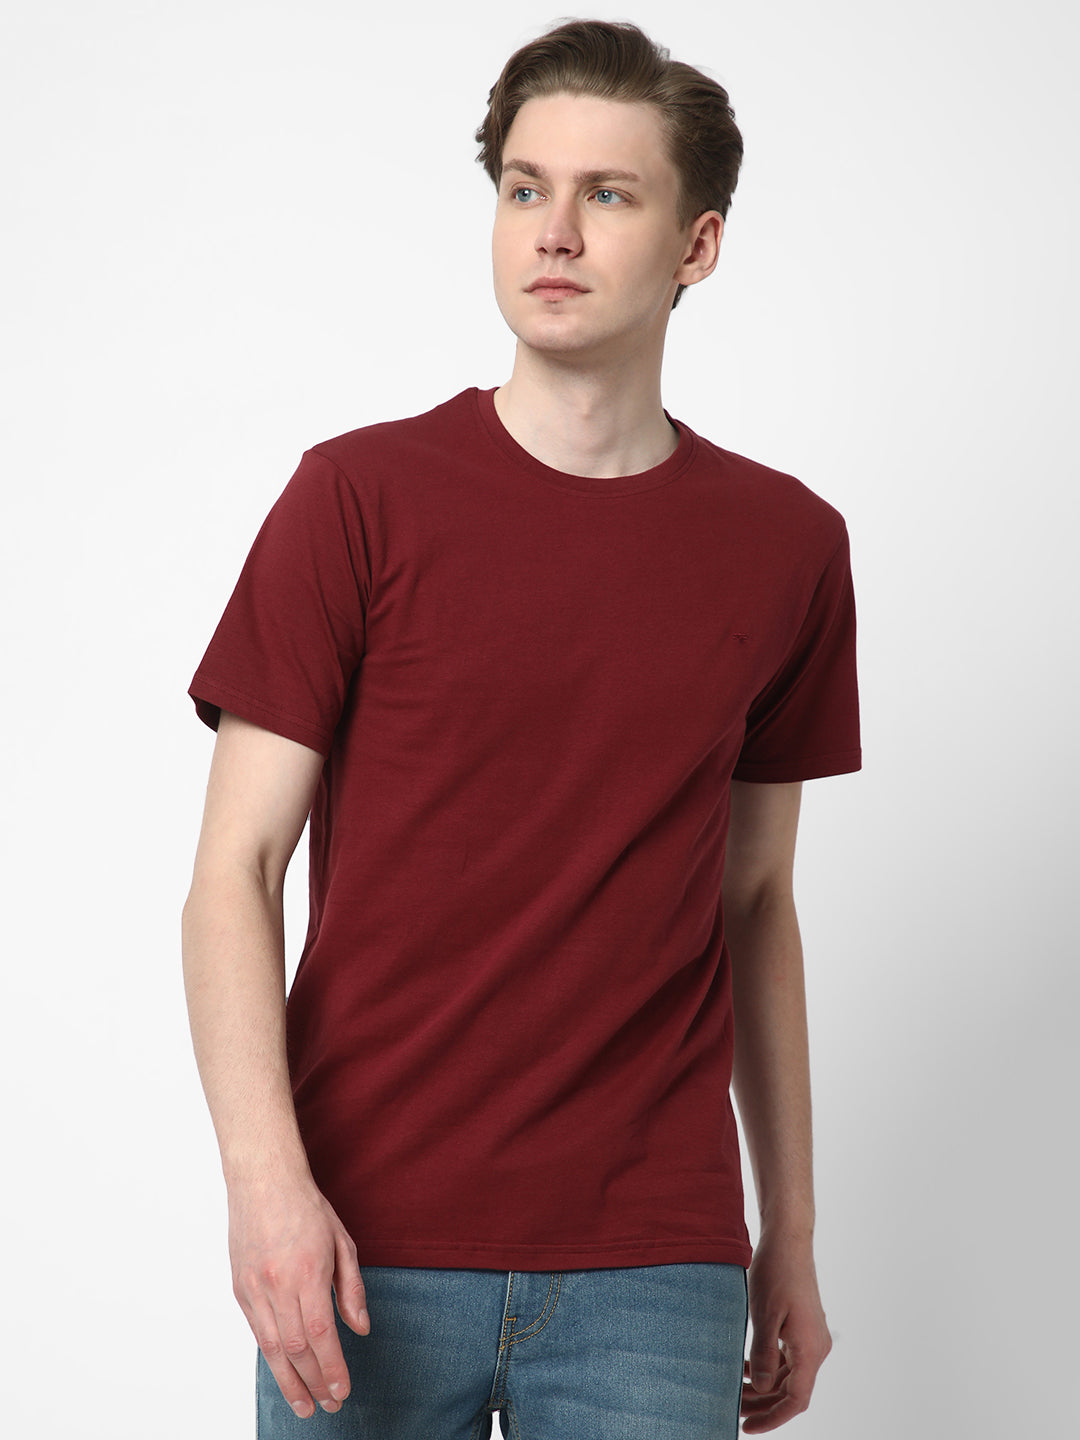 Cotstyle Cotton Fabrics Round Neck Short Length Plain Half Sleeve Casual & Daily Wear Men's T-Shirts -  Pack of 1 - Chocolate